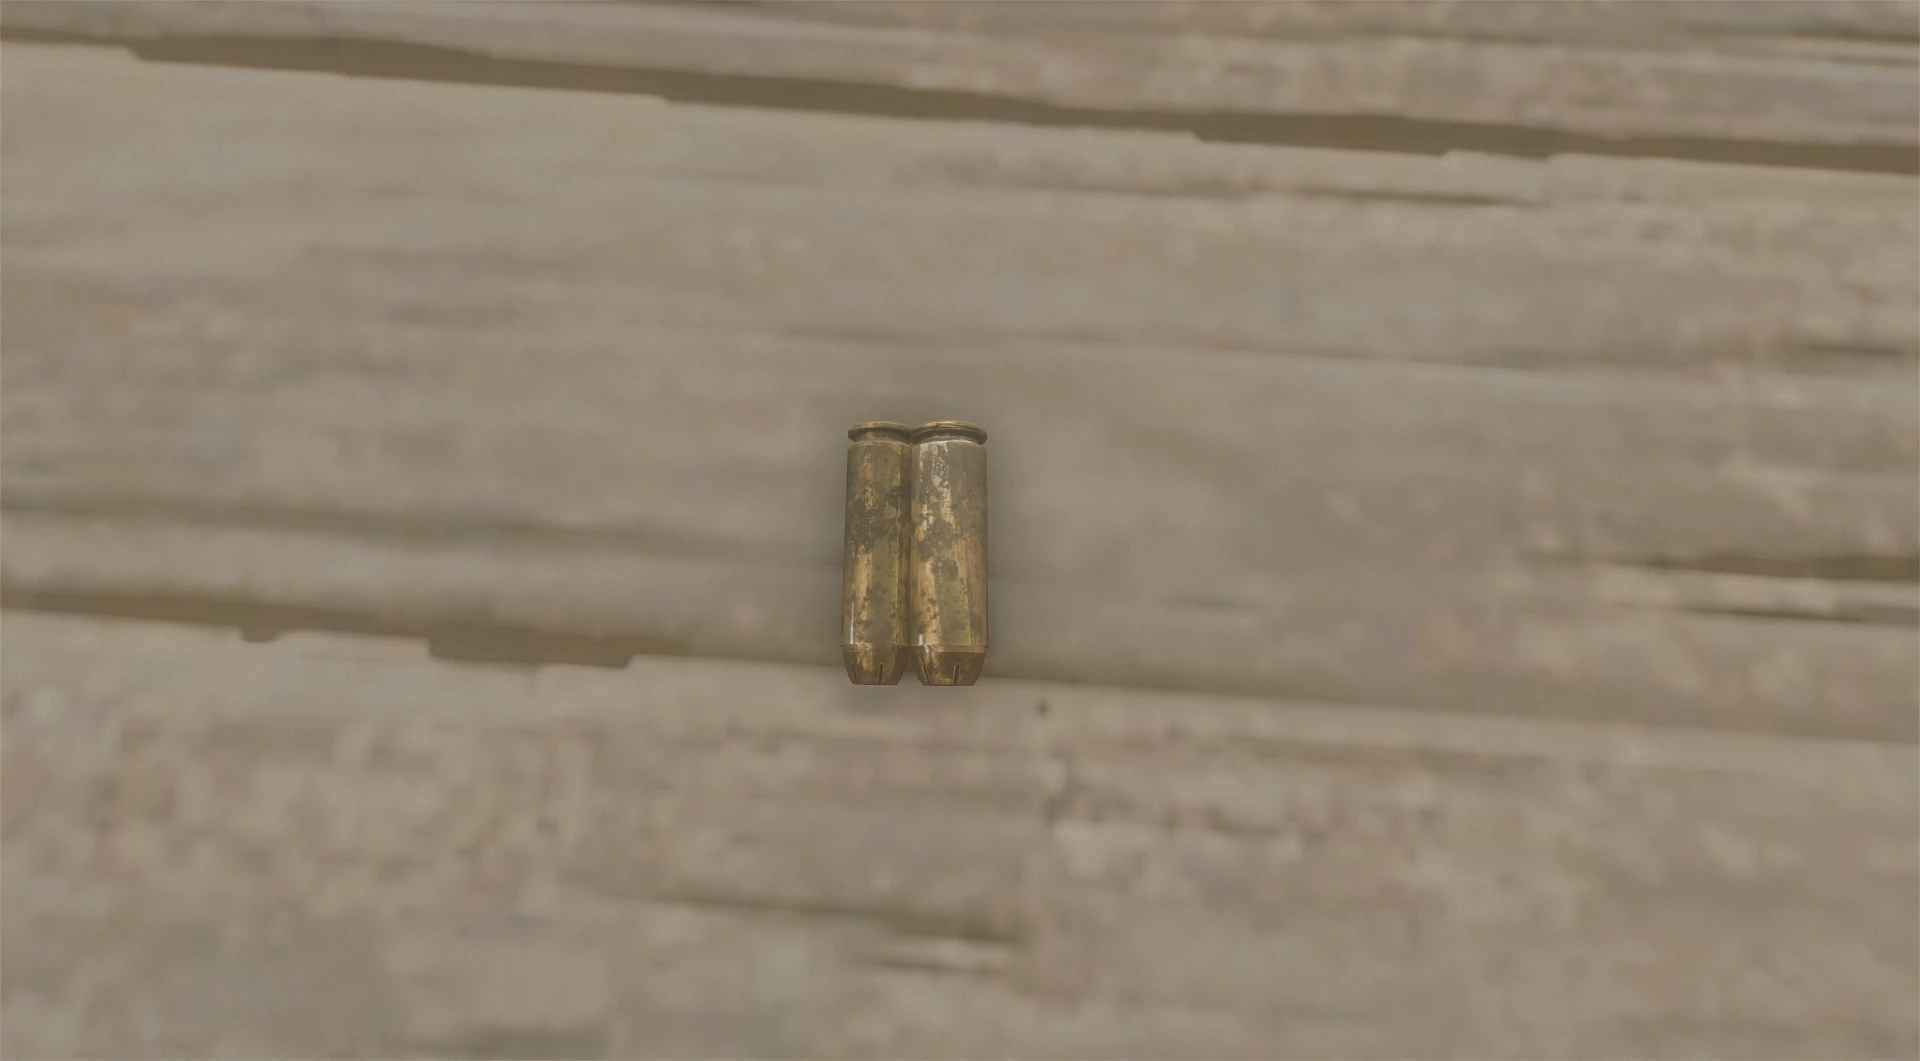 where can i find 5.56 ammo in fallout 4